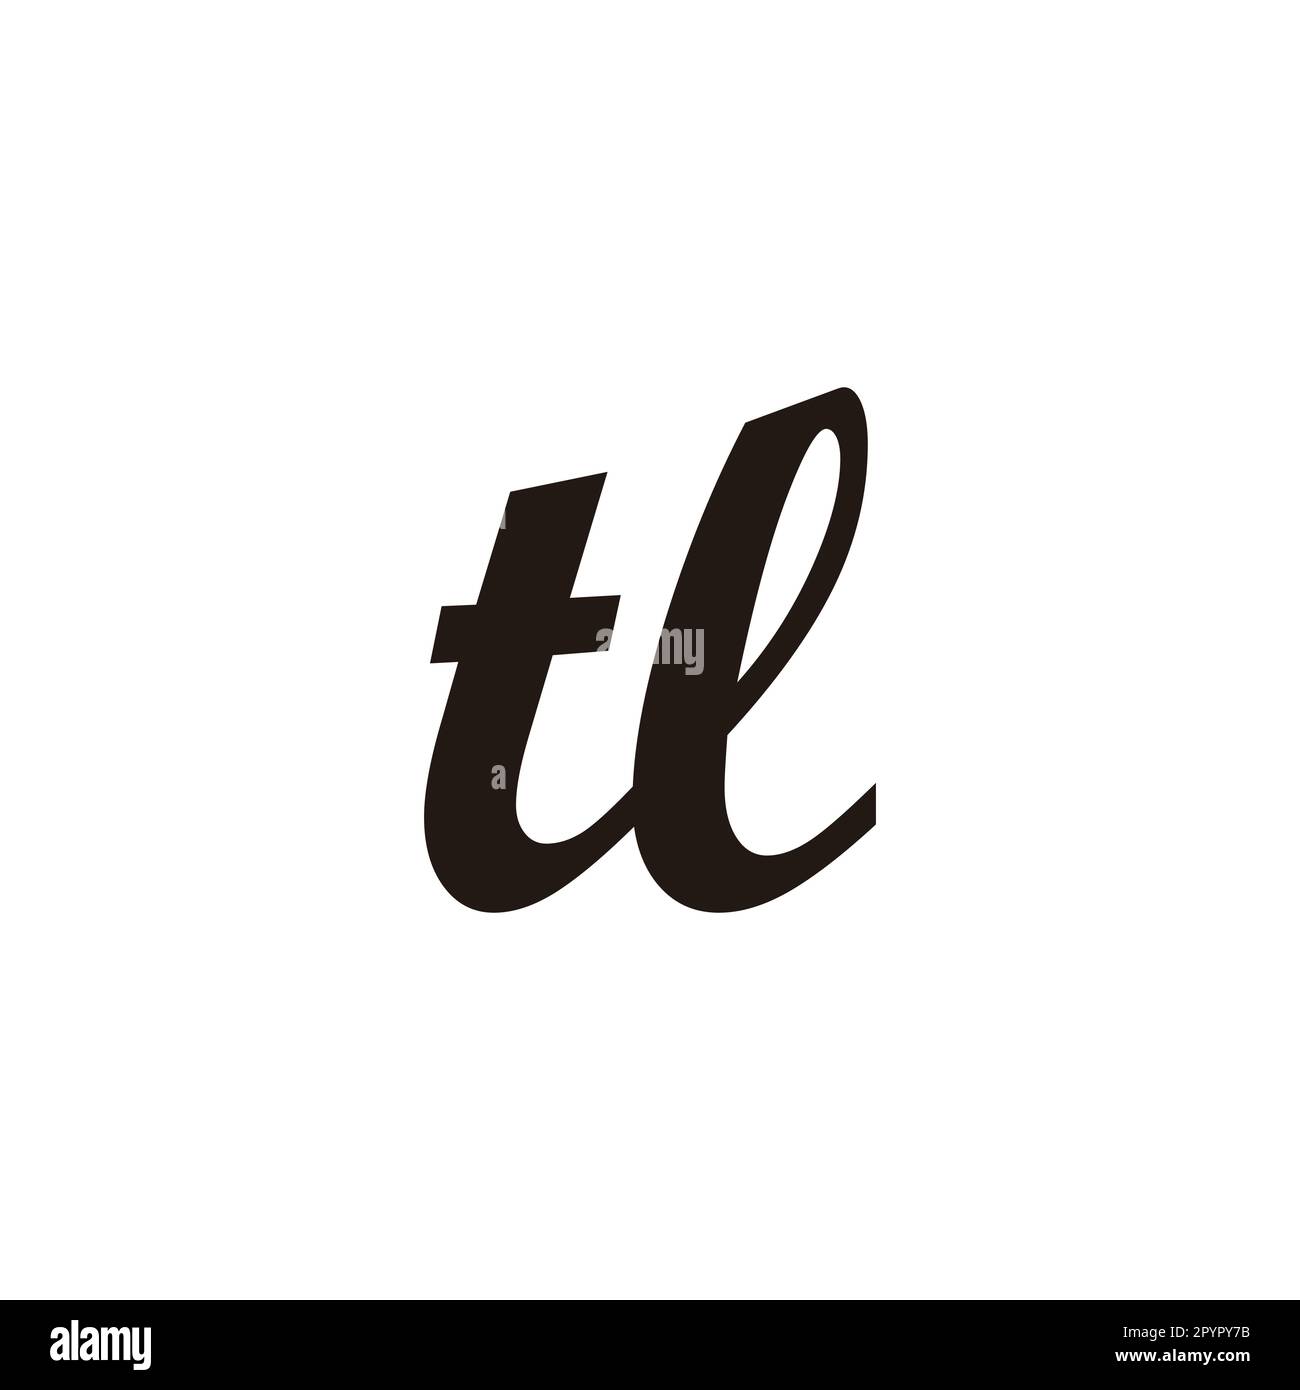 Letter tL connect geometric symbol simple logo vector Stock Vector